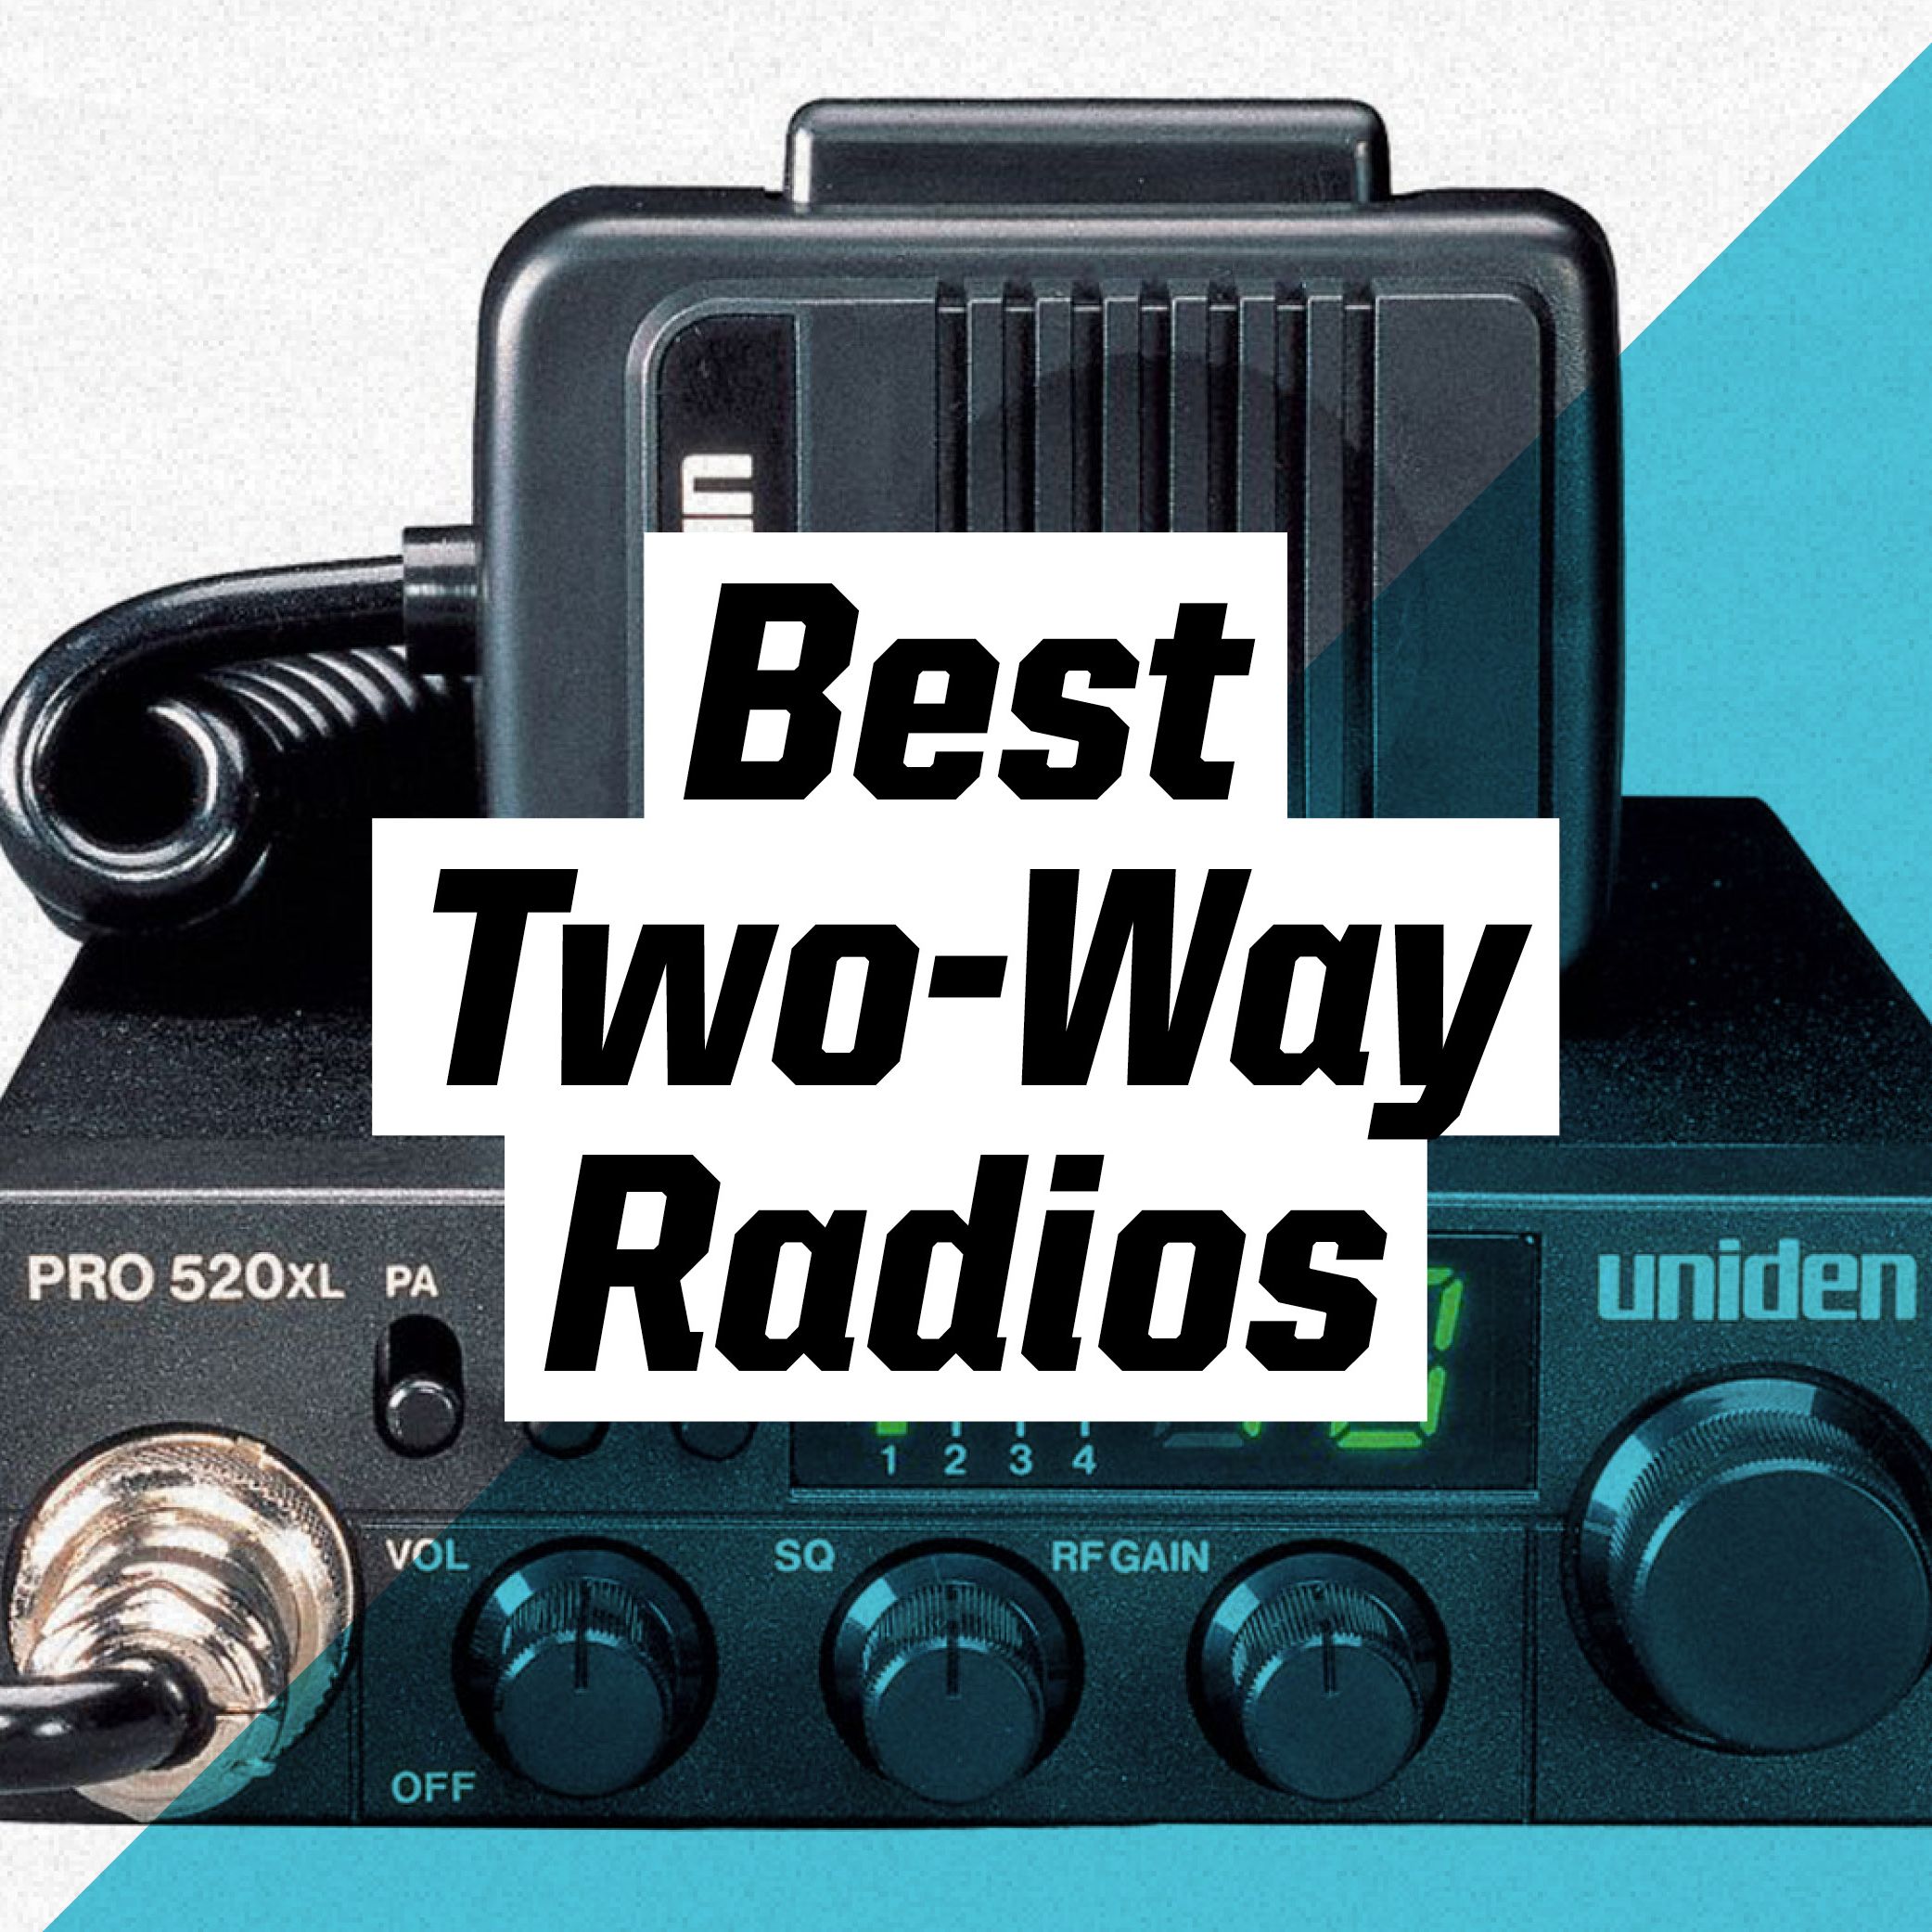 The Best Two-Way Radios, From Ham and CB to Increasingly Popular GMRS